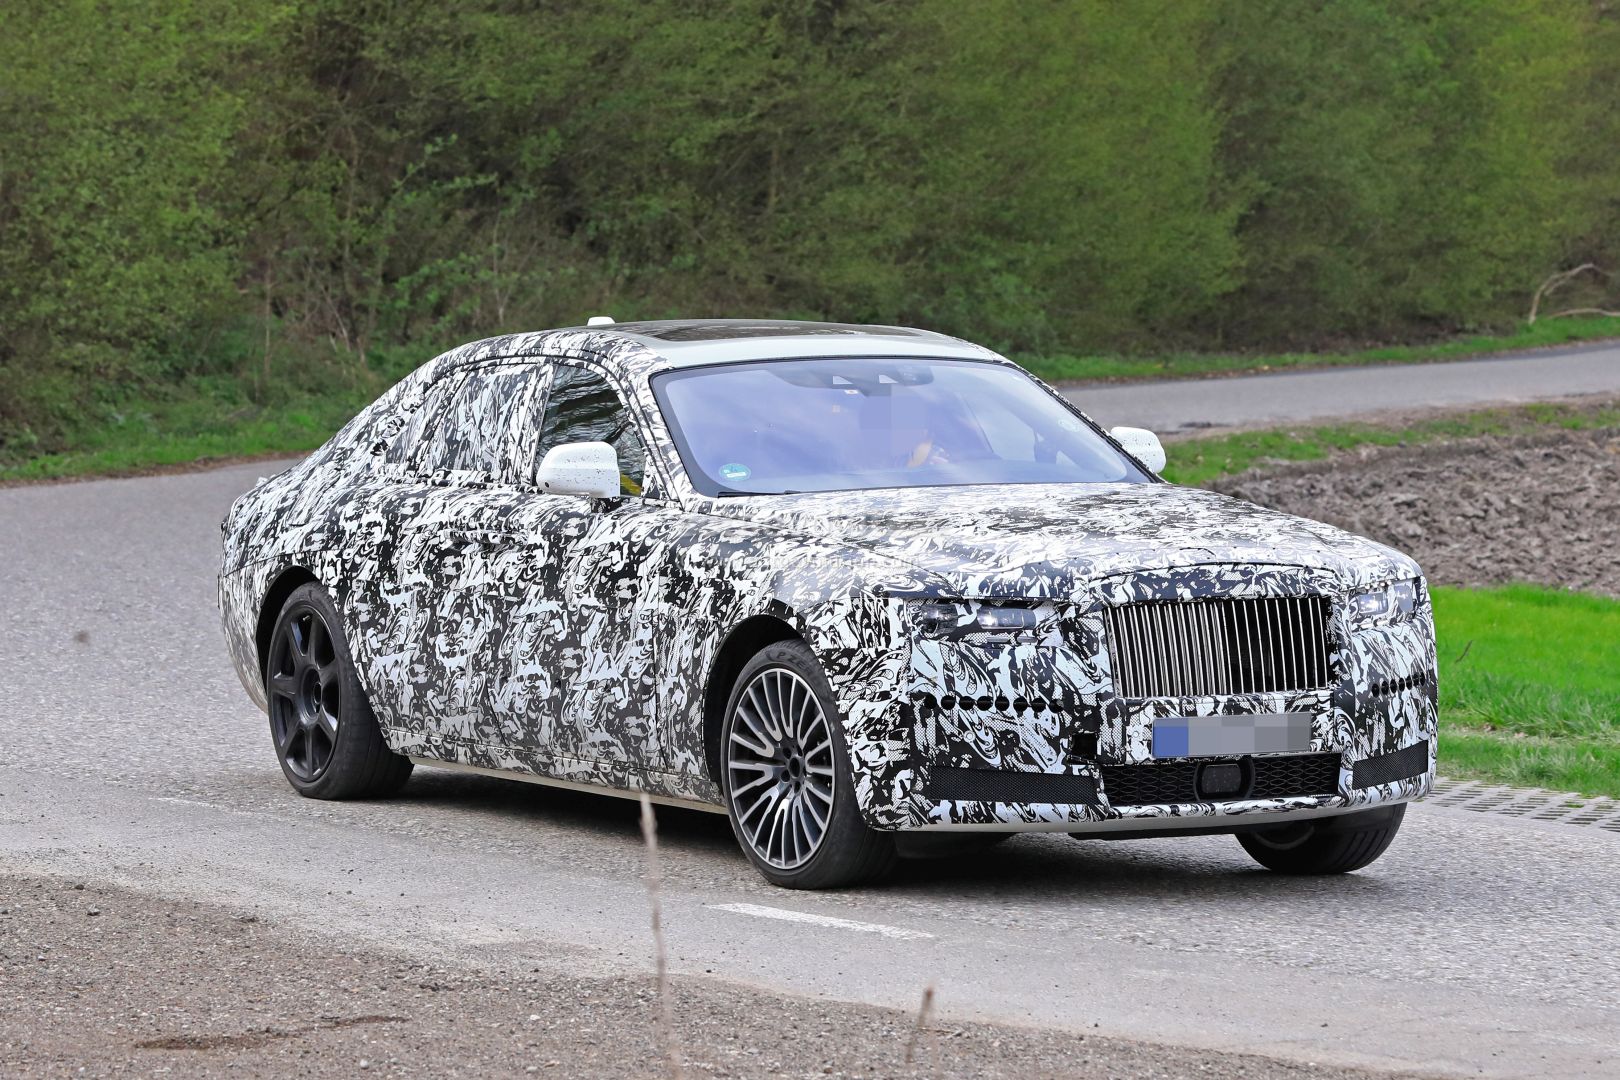 2021 Rolls Royce Ghost Prototype Spotted On The Road Shows